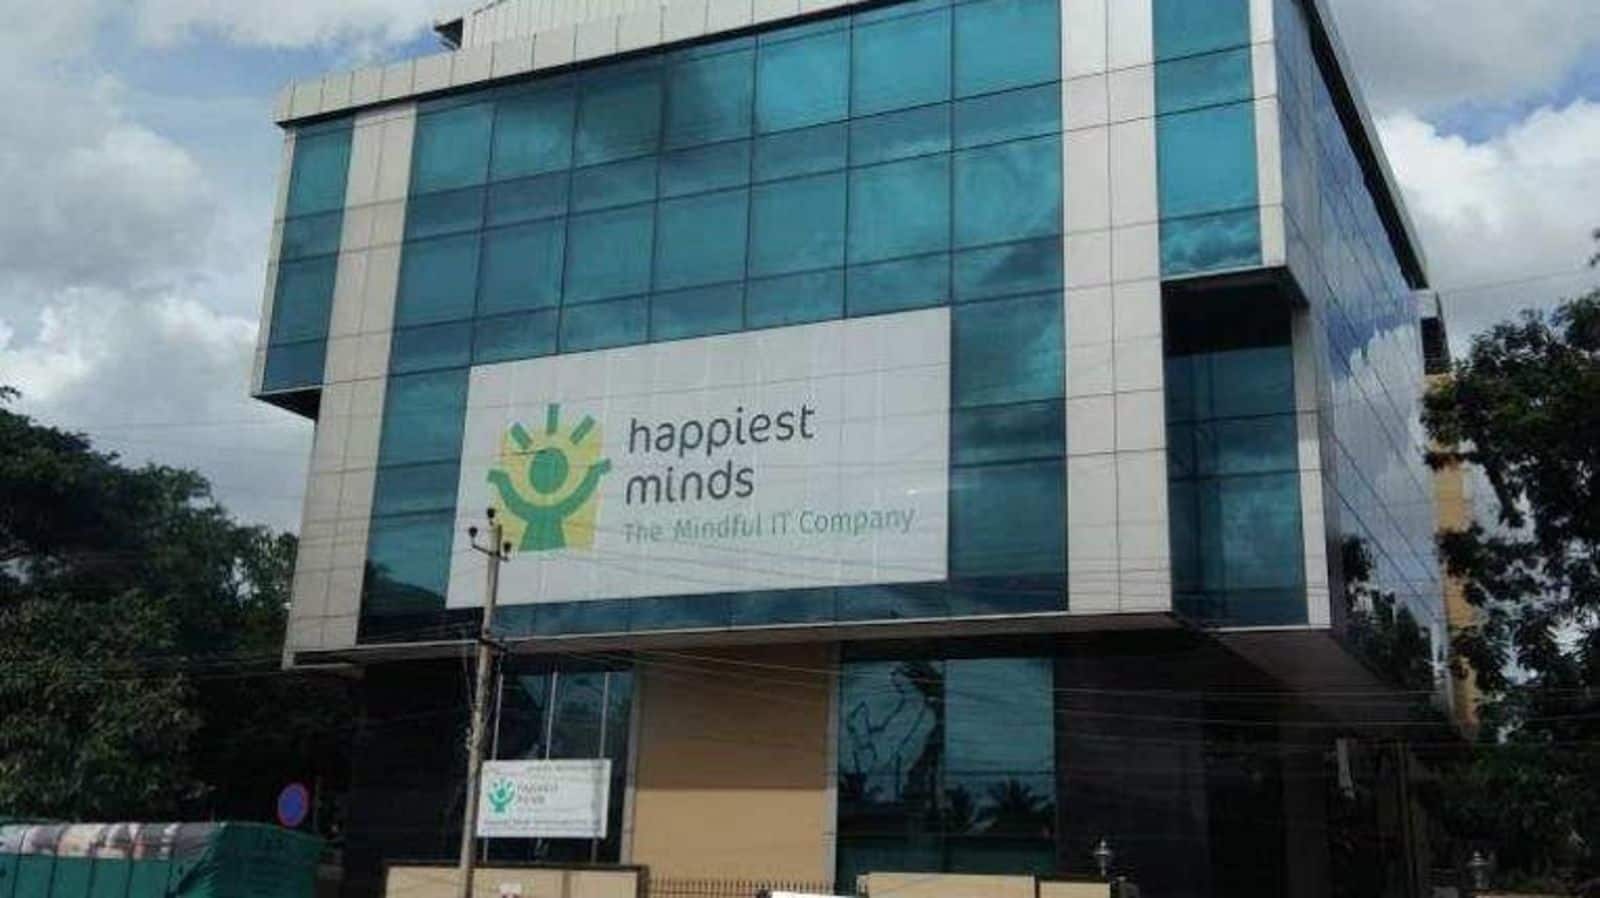 Happiest Minds Technologies' board of directors approved a Rs 1,400 crore equity or debt bond raise on Wednesday. According to the filing, the company has the option of raising funds through a public offering, preferred allotment, private placement, or other means.